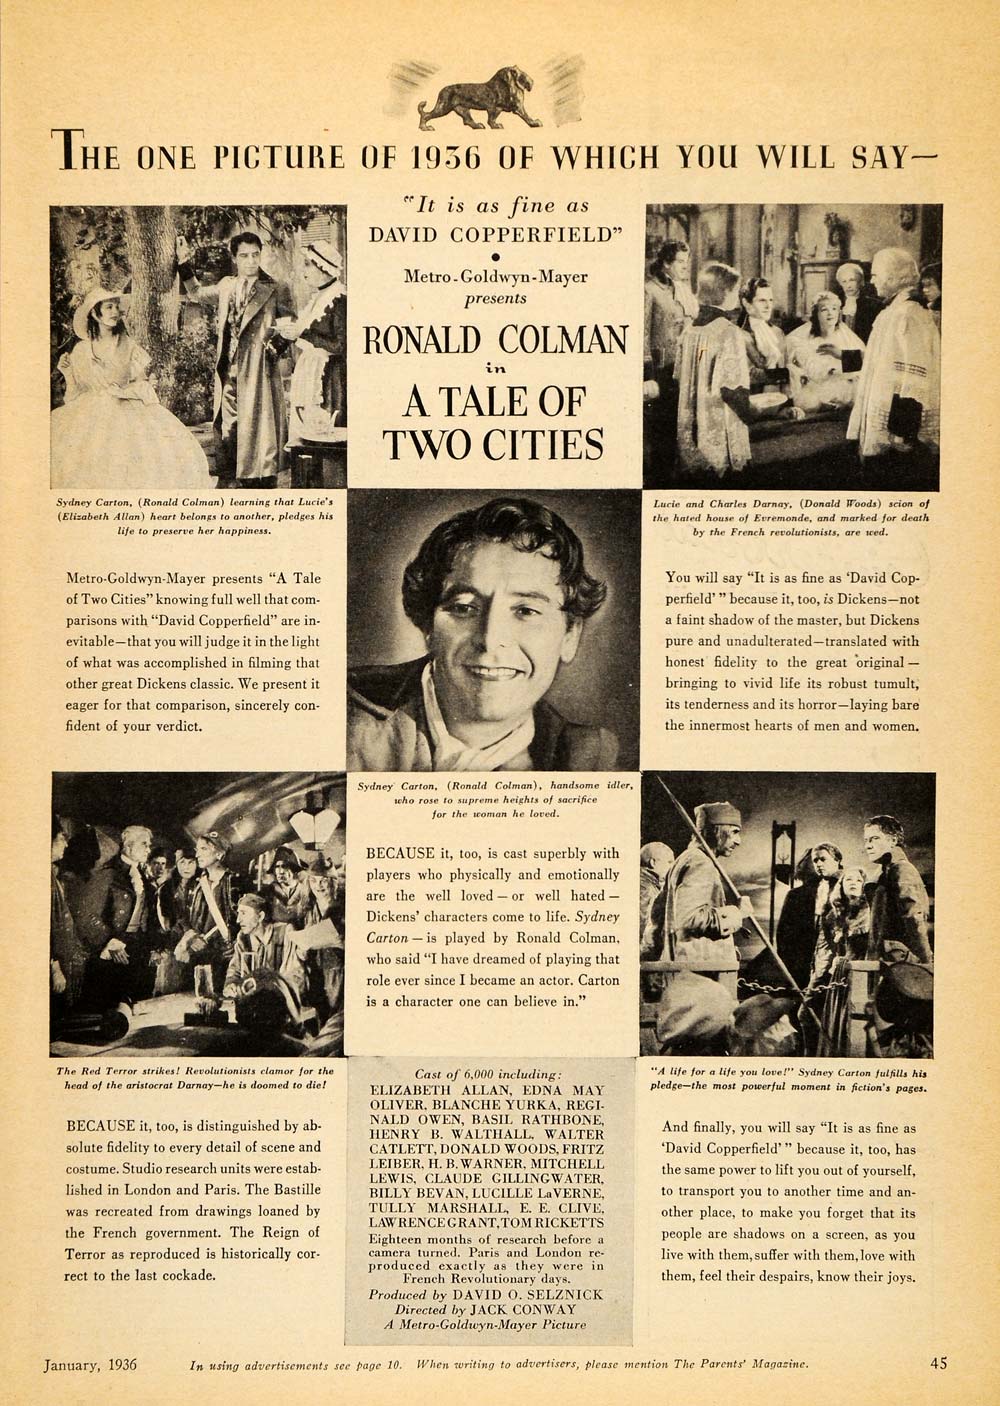 1936 Movie Ad A Tale of Two Cities Ronald Coleman MGM - ORIGINAL PTS1